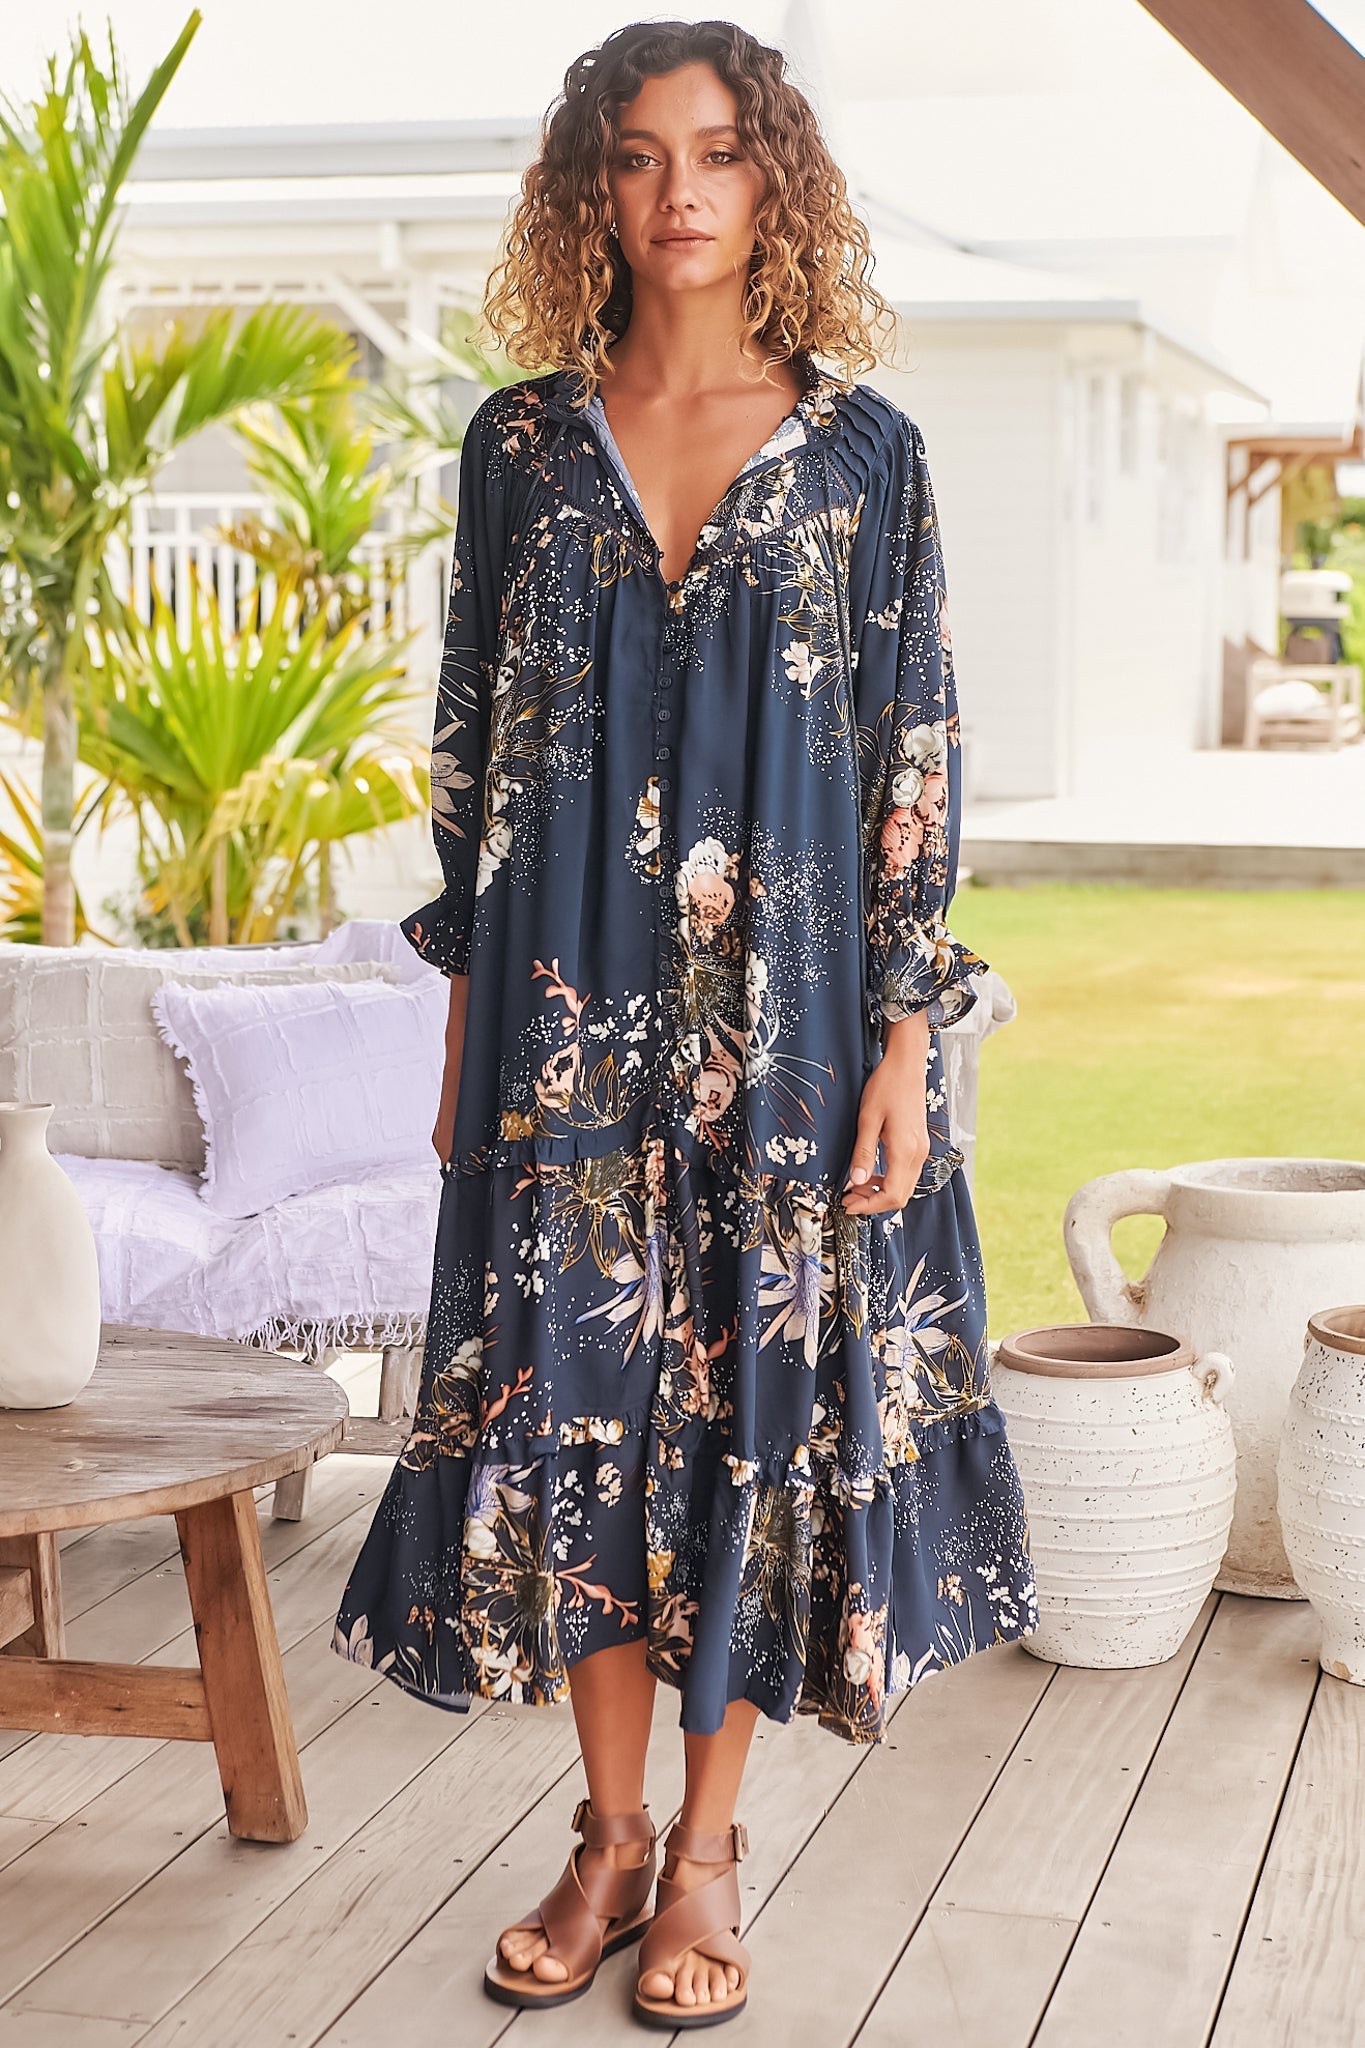 JAASE - Briana Midi Dress: Frill Collar Oversized Buttoned Dress with Waist Tie and Frill Splicing in Indigo Print